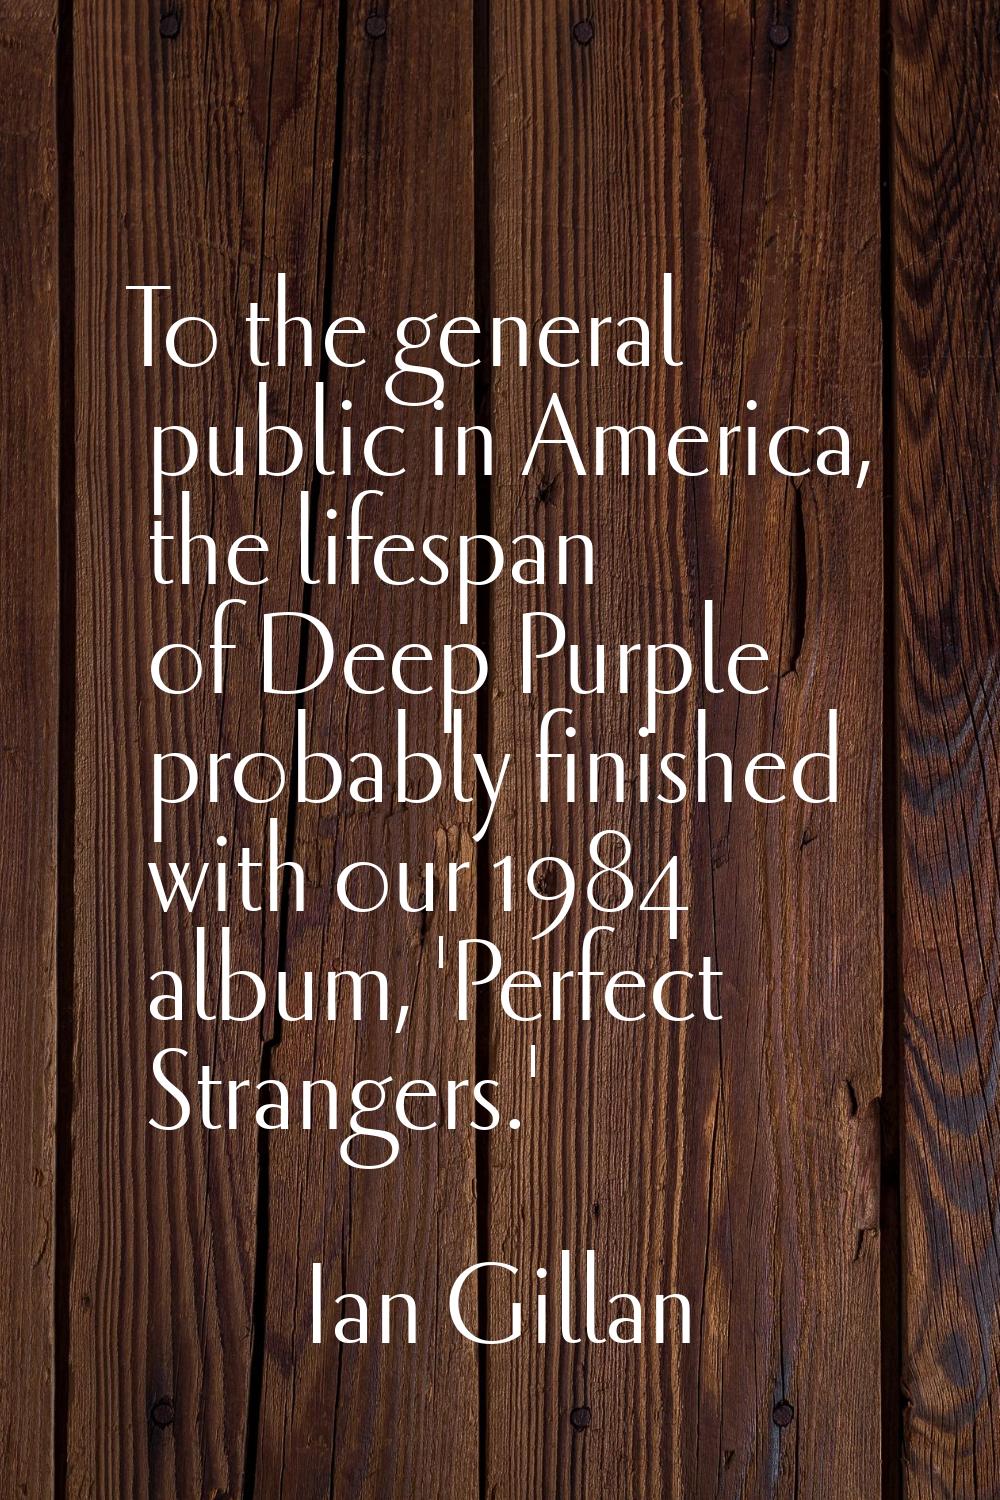 To the general public in America, the lifespan of Deep Purple probably finished with our 1984 album